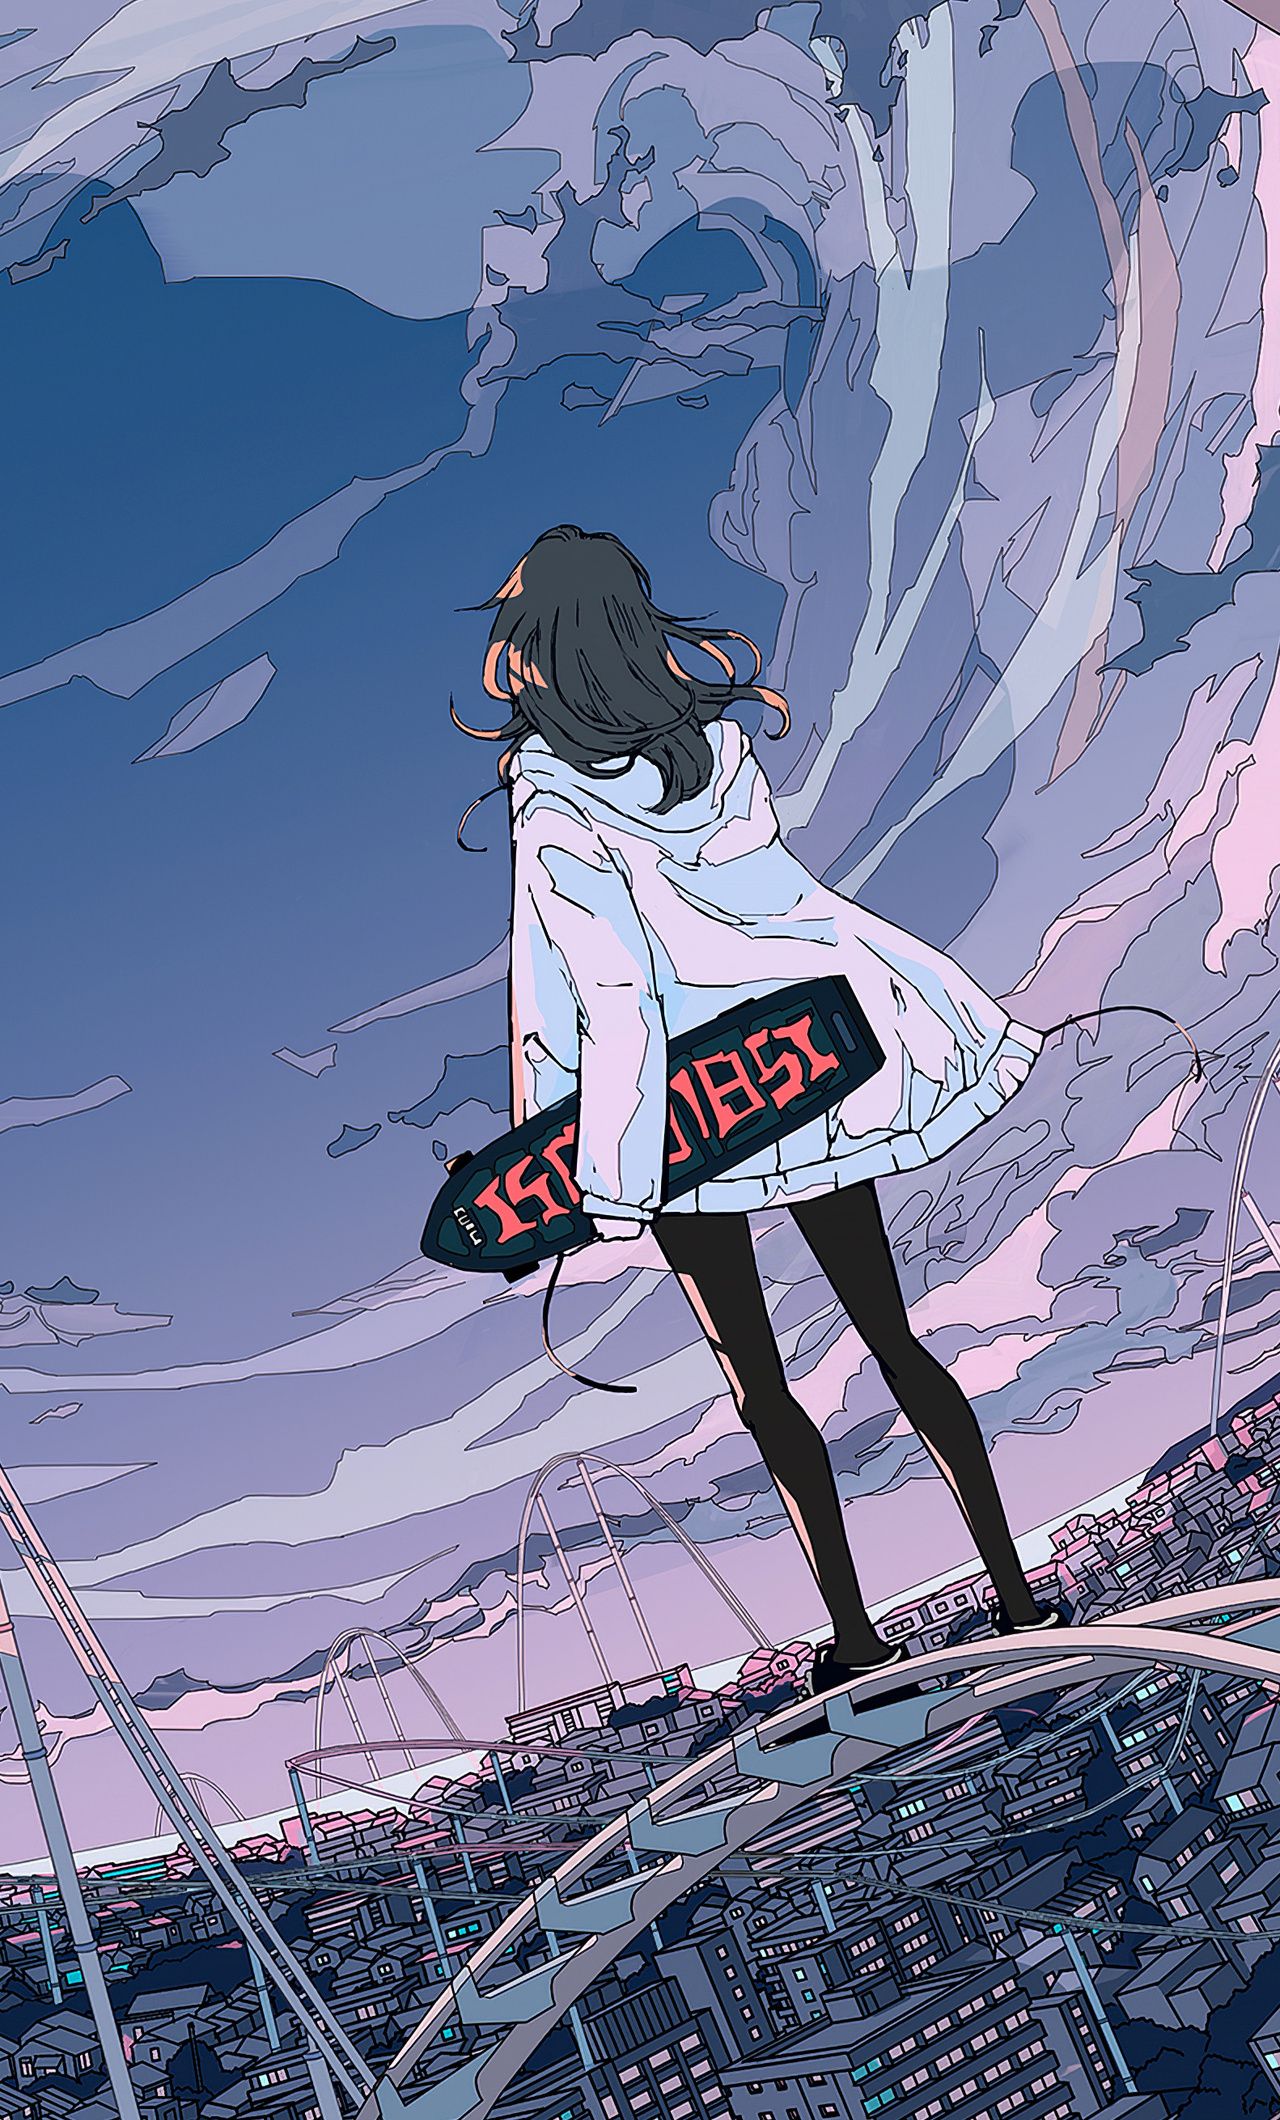 Skateboarding Anime Posters for Sale | Redbubble